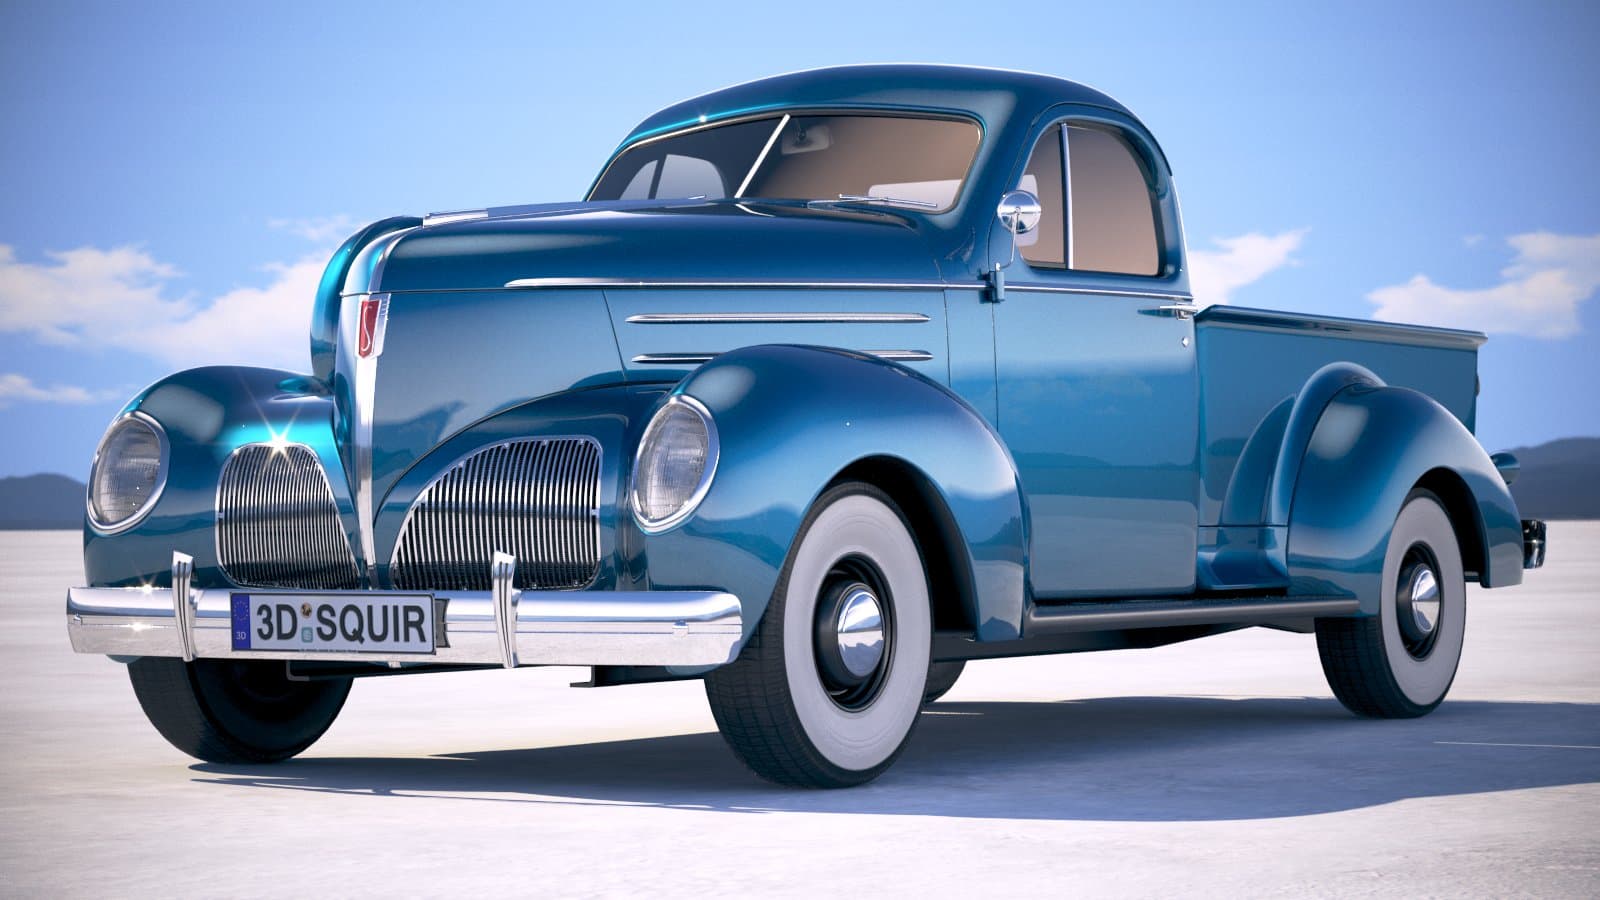 Studebaker Coupe Express Wallpapers